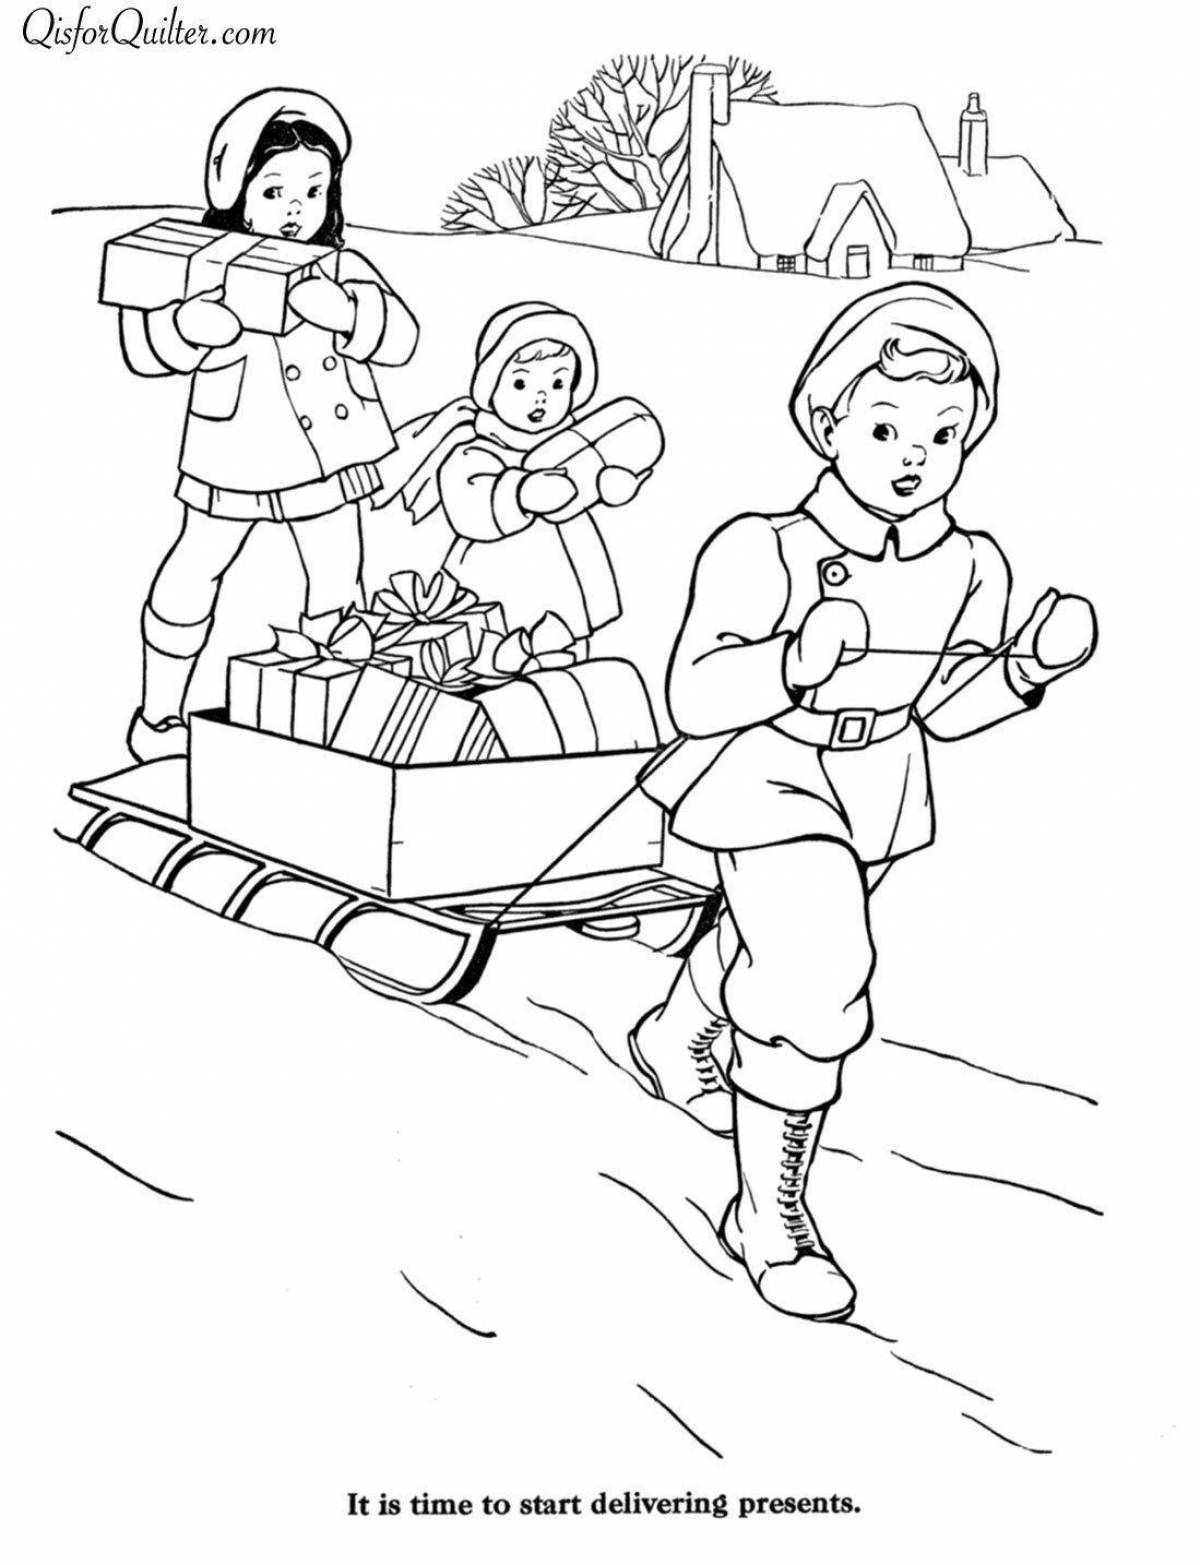 Colorful caleda coloring page